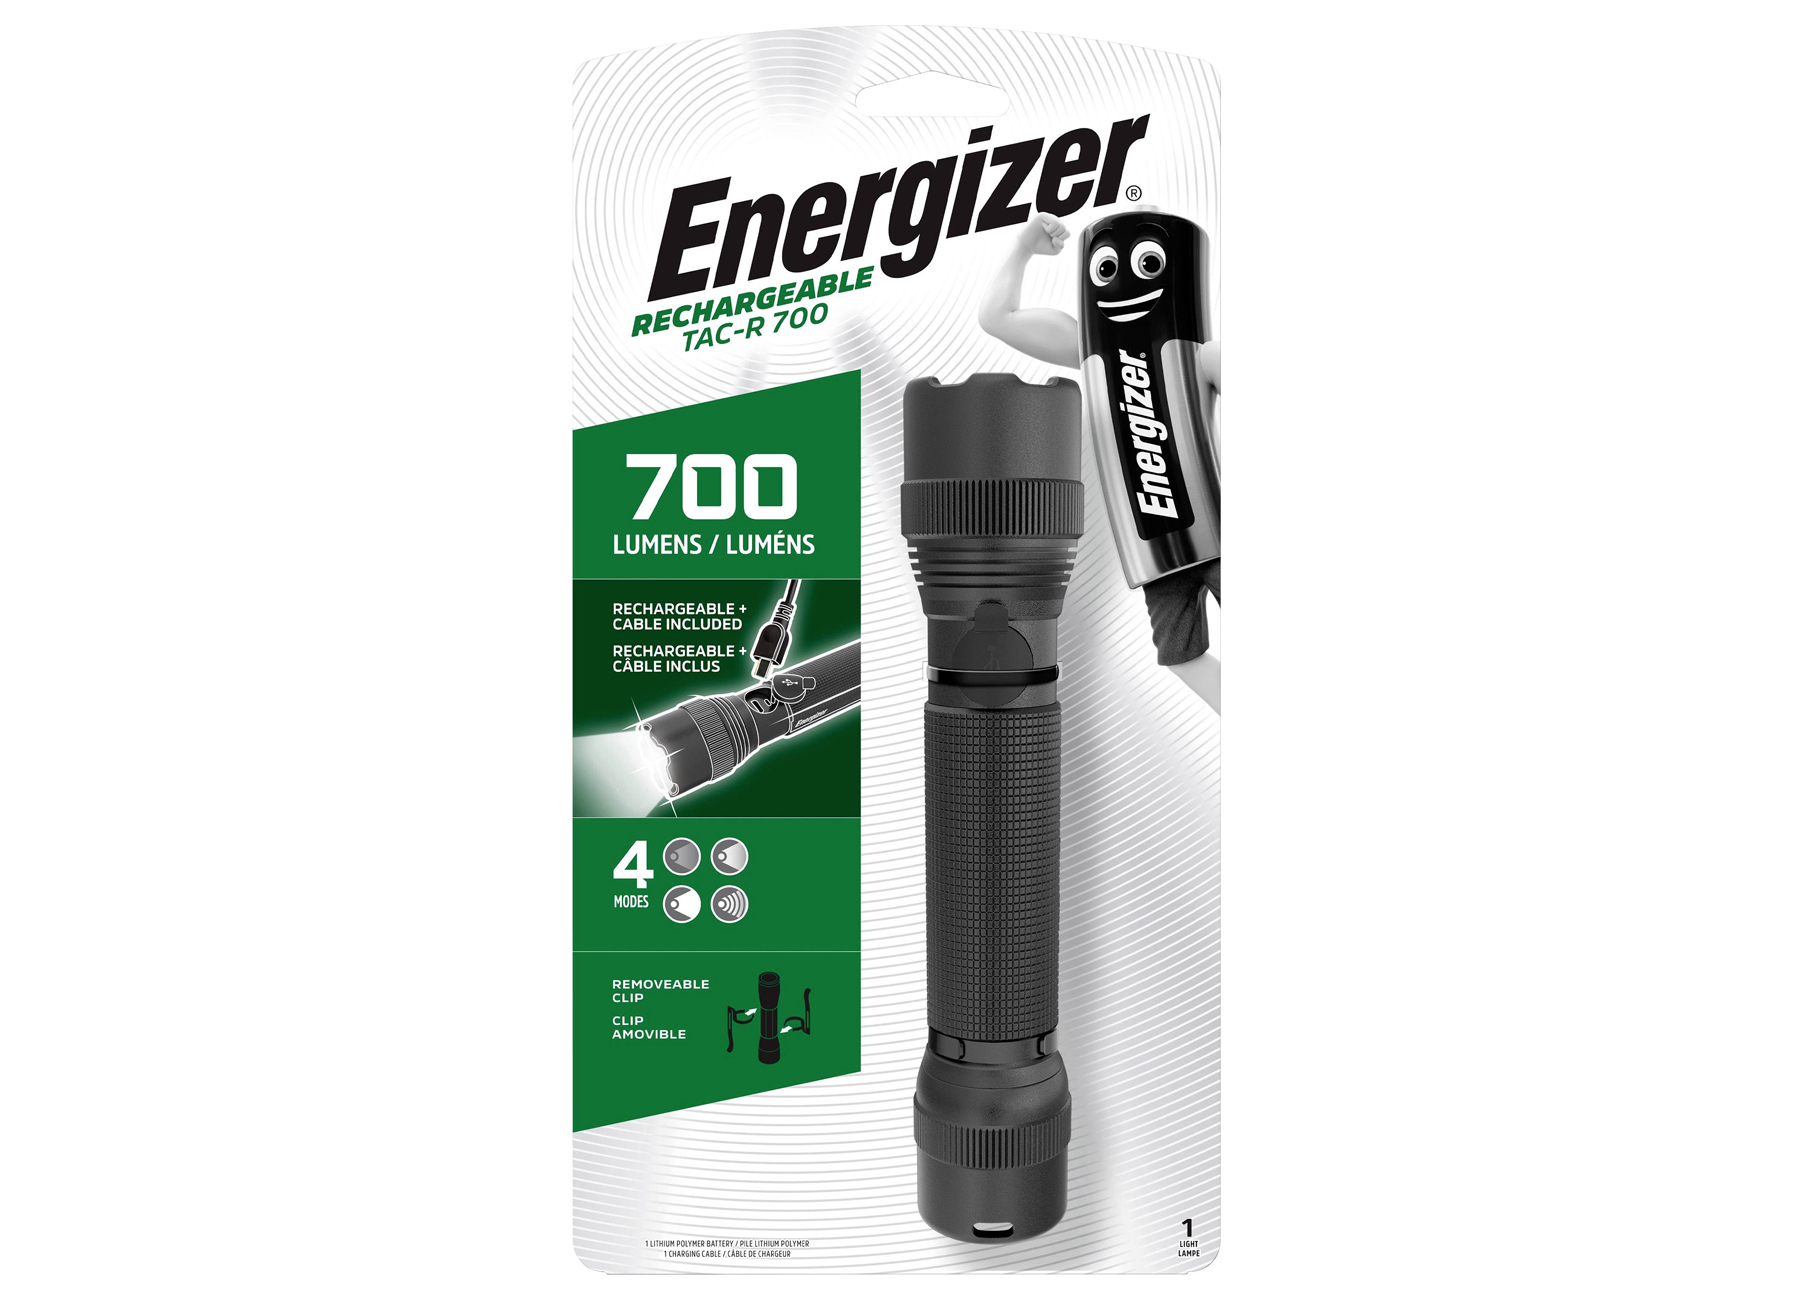 ENERGIZER RECHARGEABLE TACTICAL LIGHT 700